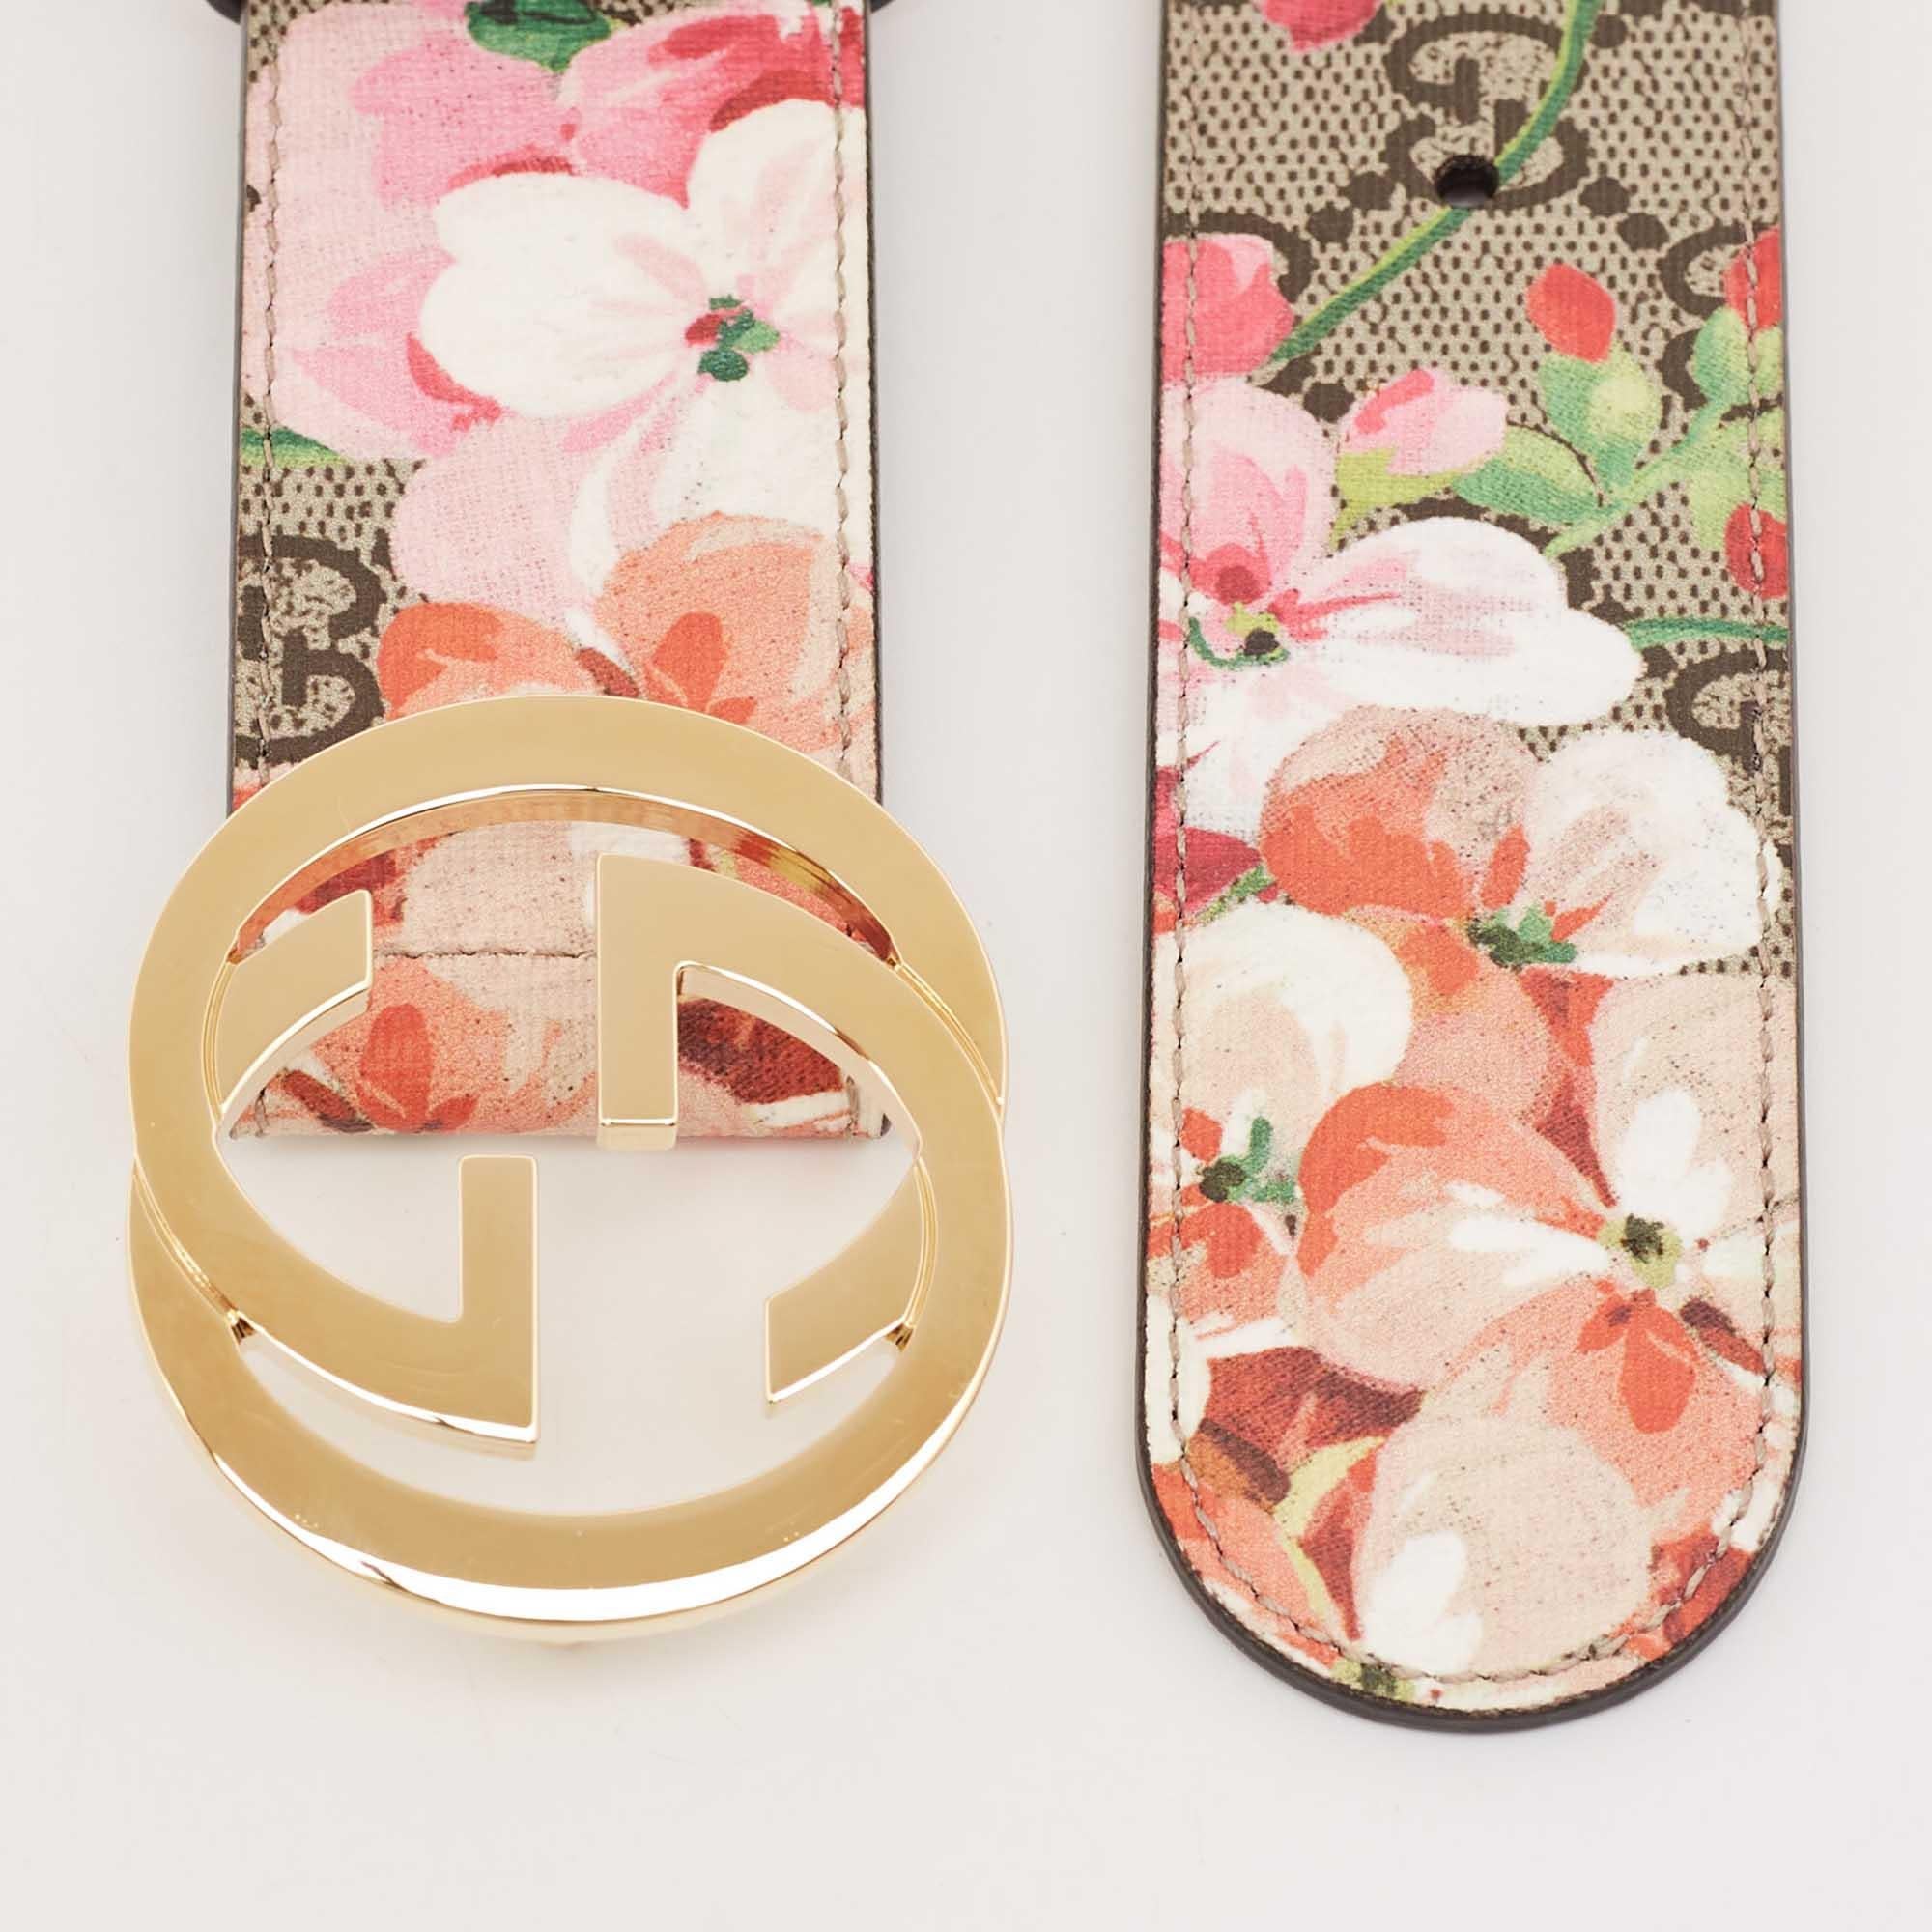 A classic add-on to your collection of belts is this designer piece. Cut to a convenient length, the belt has a smooth finish and a sturdy built. It will continually complement your style.

Includes: Original Dustbag, Original Box